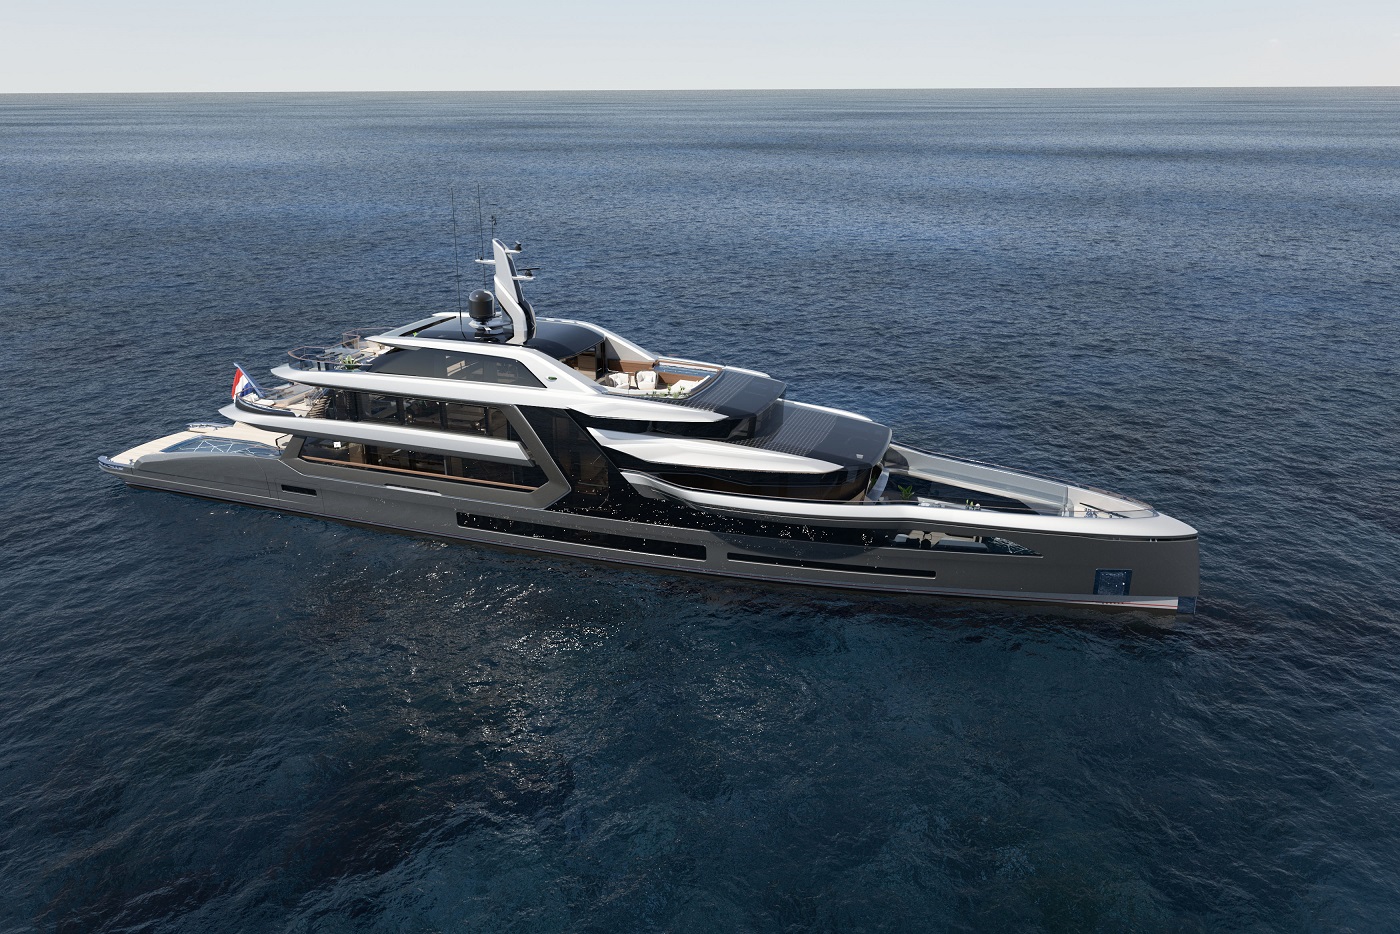 PHATHOM 60M New Build Yacht for Sale with YACHTZOO